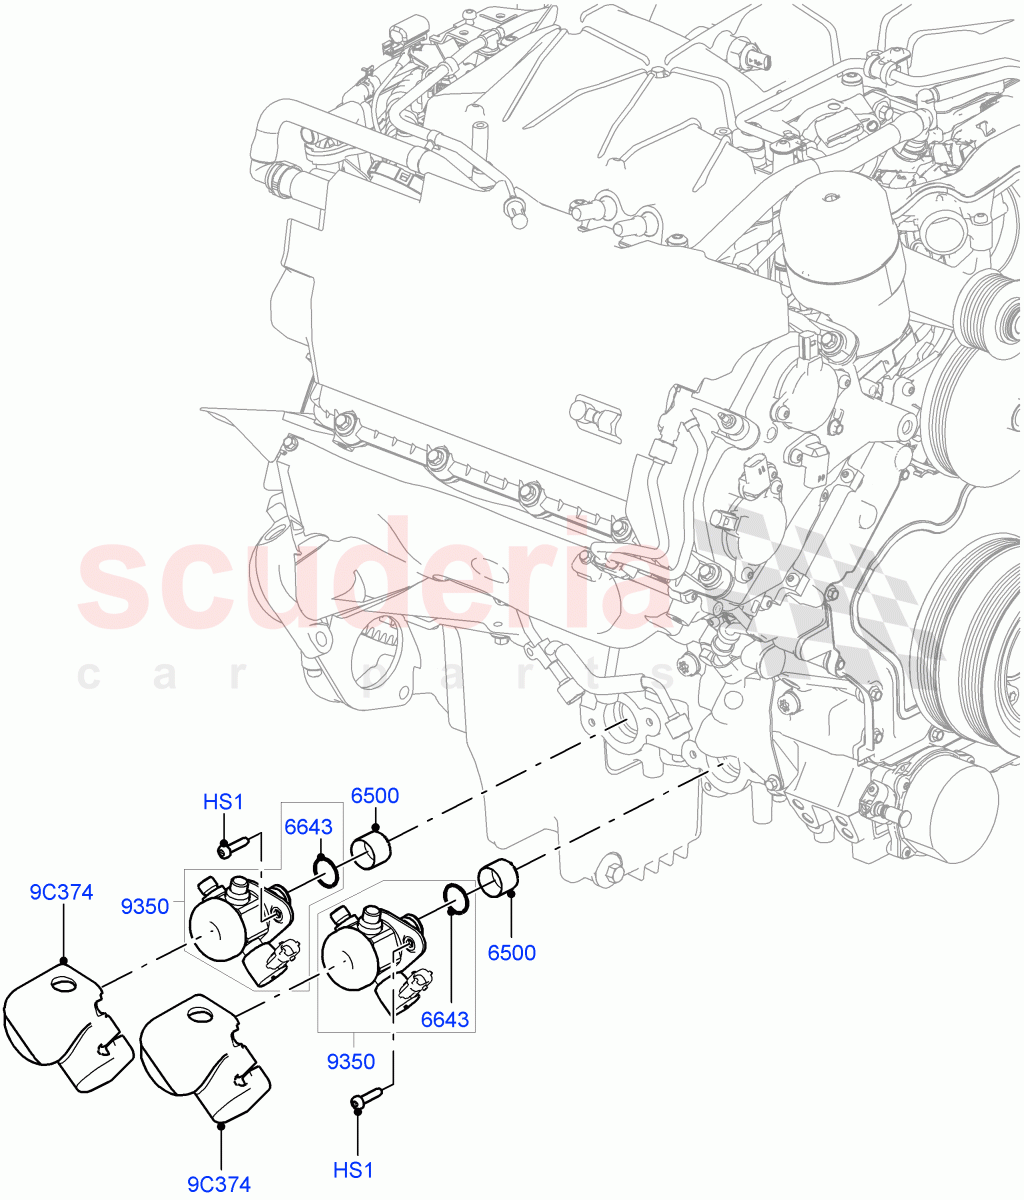 Fuel Injection Pump-Engine Mounted(Solihull Plant Build)(3.0L DOHC GDI SC V6 PETROL)((V)FROMEA000001) of Land Rover Land Rover Range Rover Velar (2017+) [3.0 DOHC GDI SC V6 Petrol]